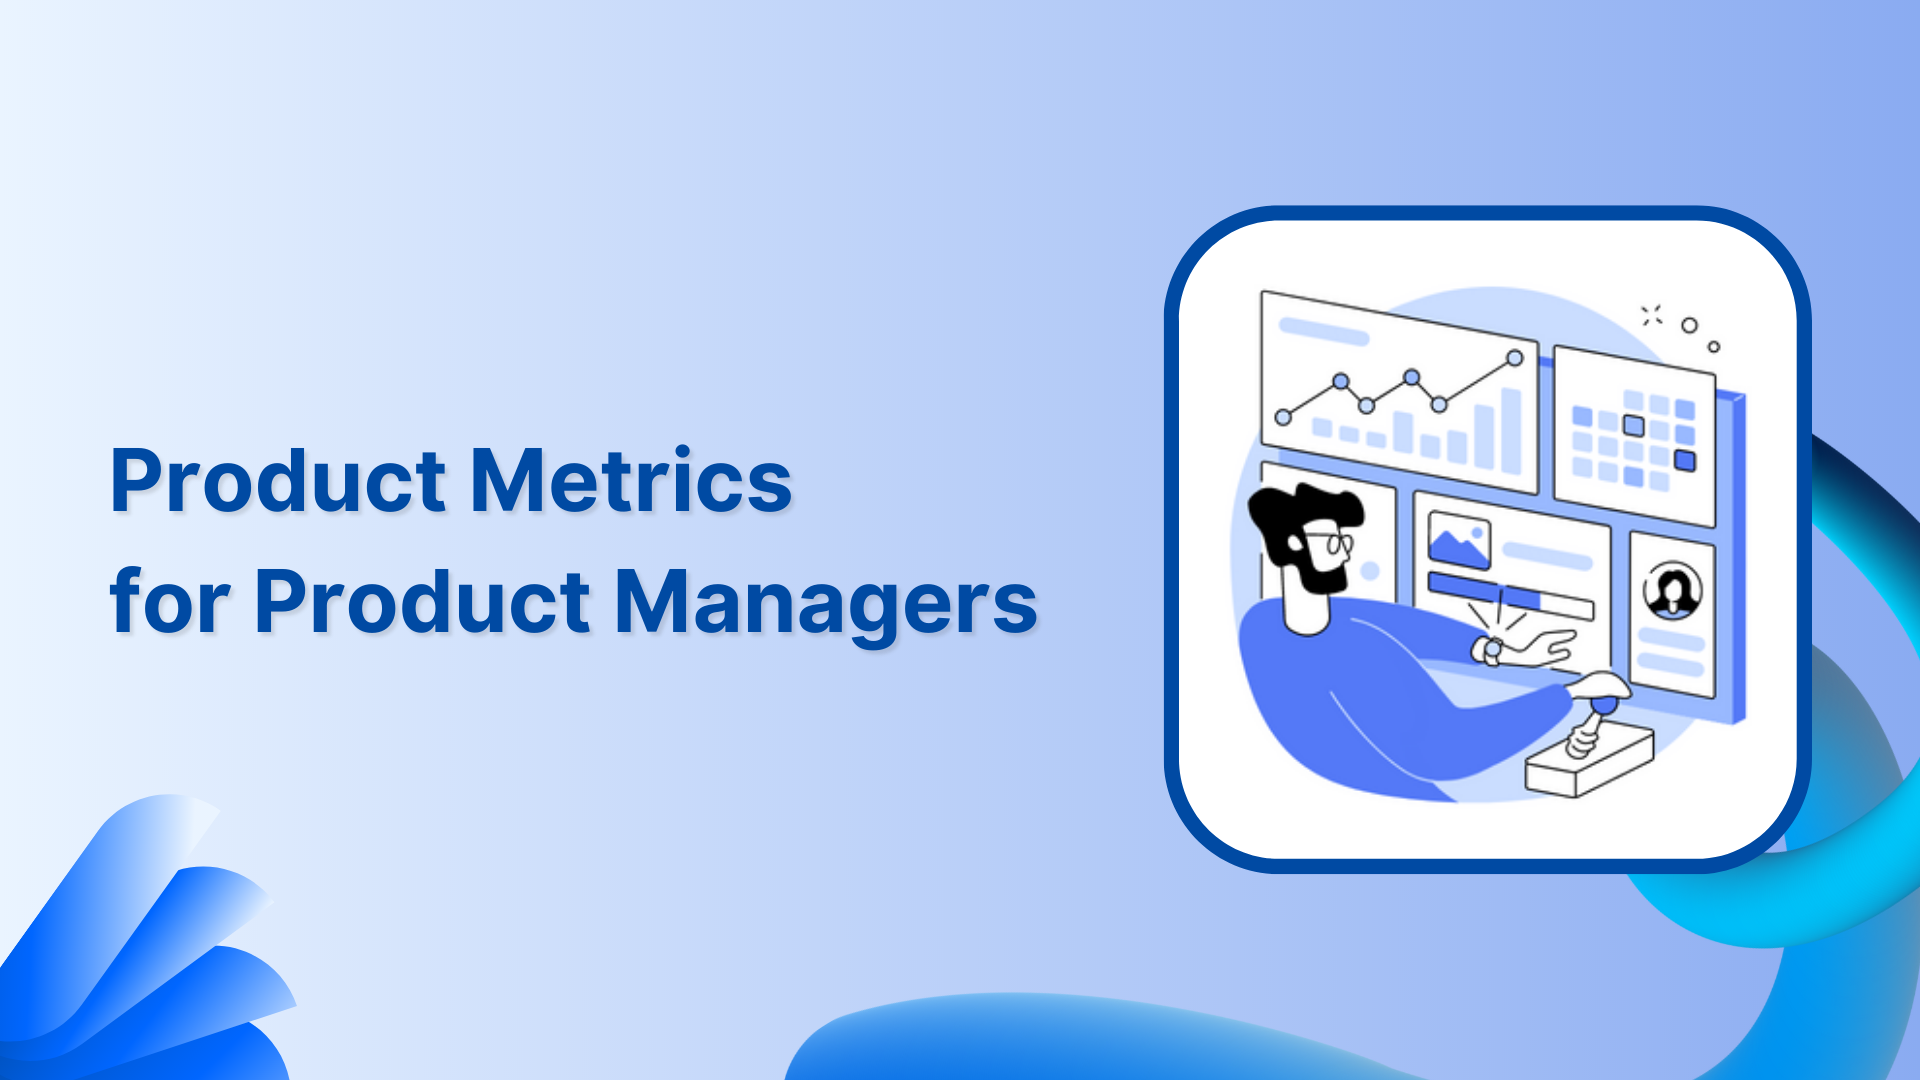 The Complete Guide to Product Metrics for Product Managers